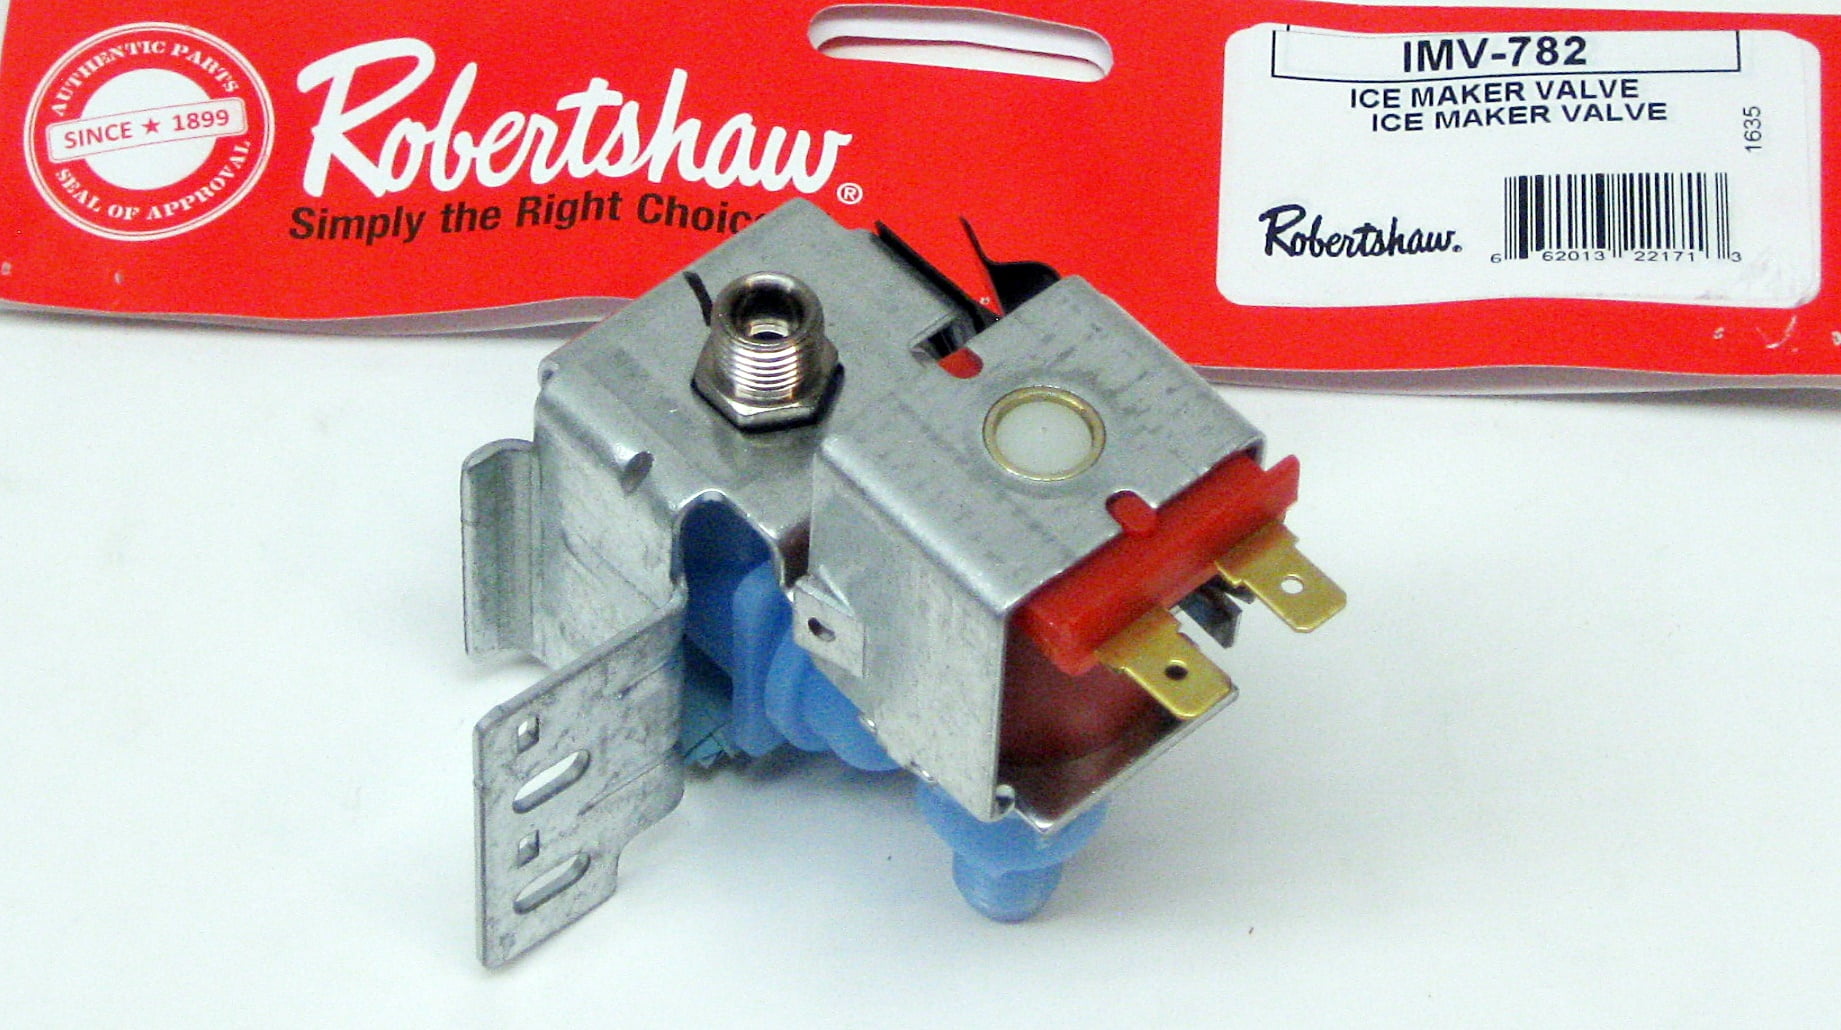 Robertshaw IMV-701 Dual Water Valve for Residential Refrigerator Icemakers